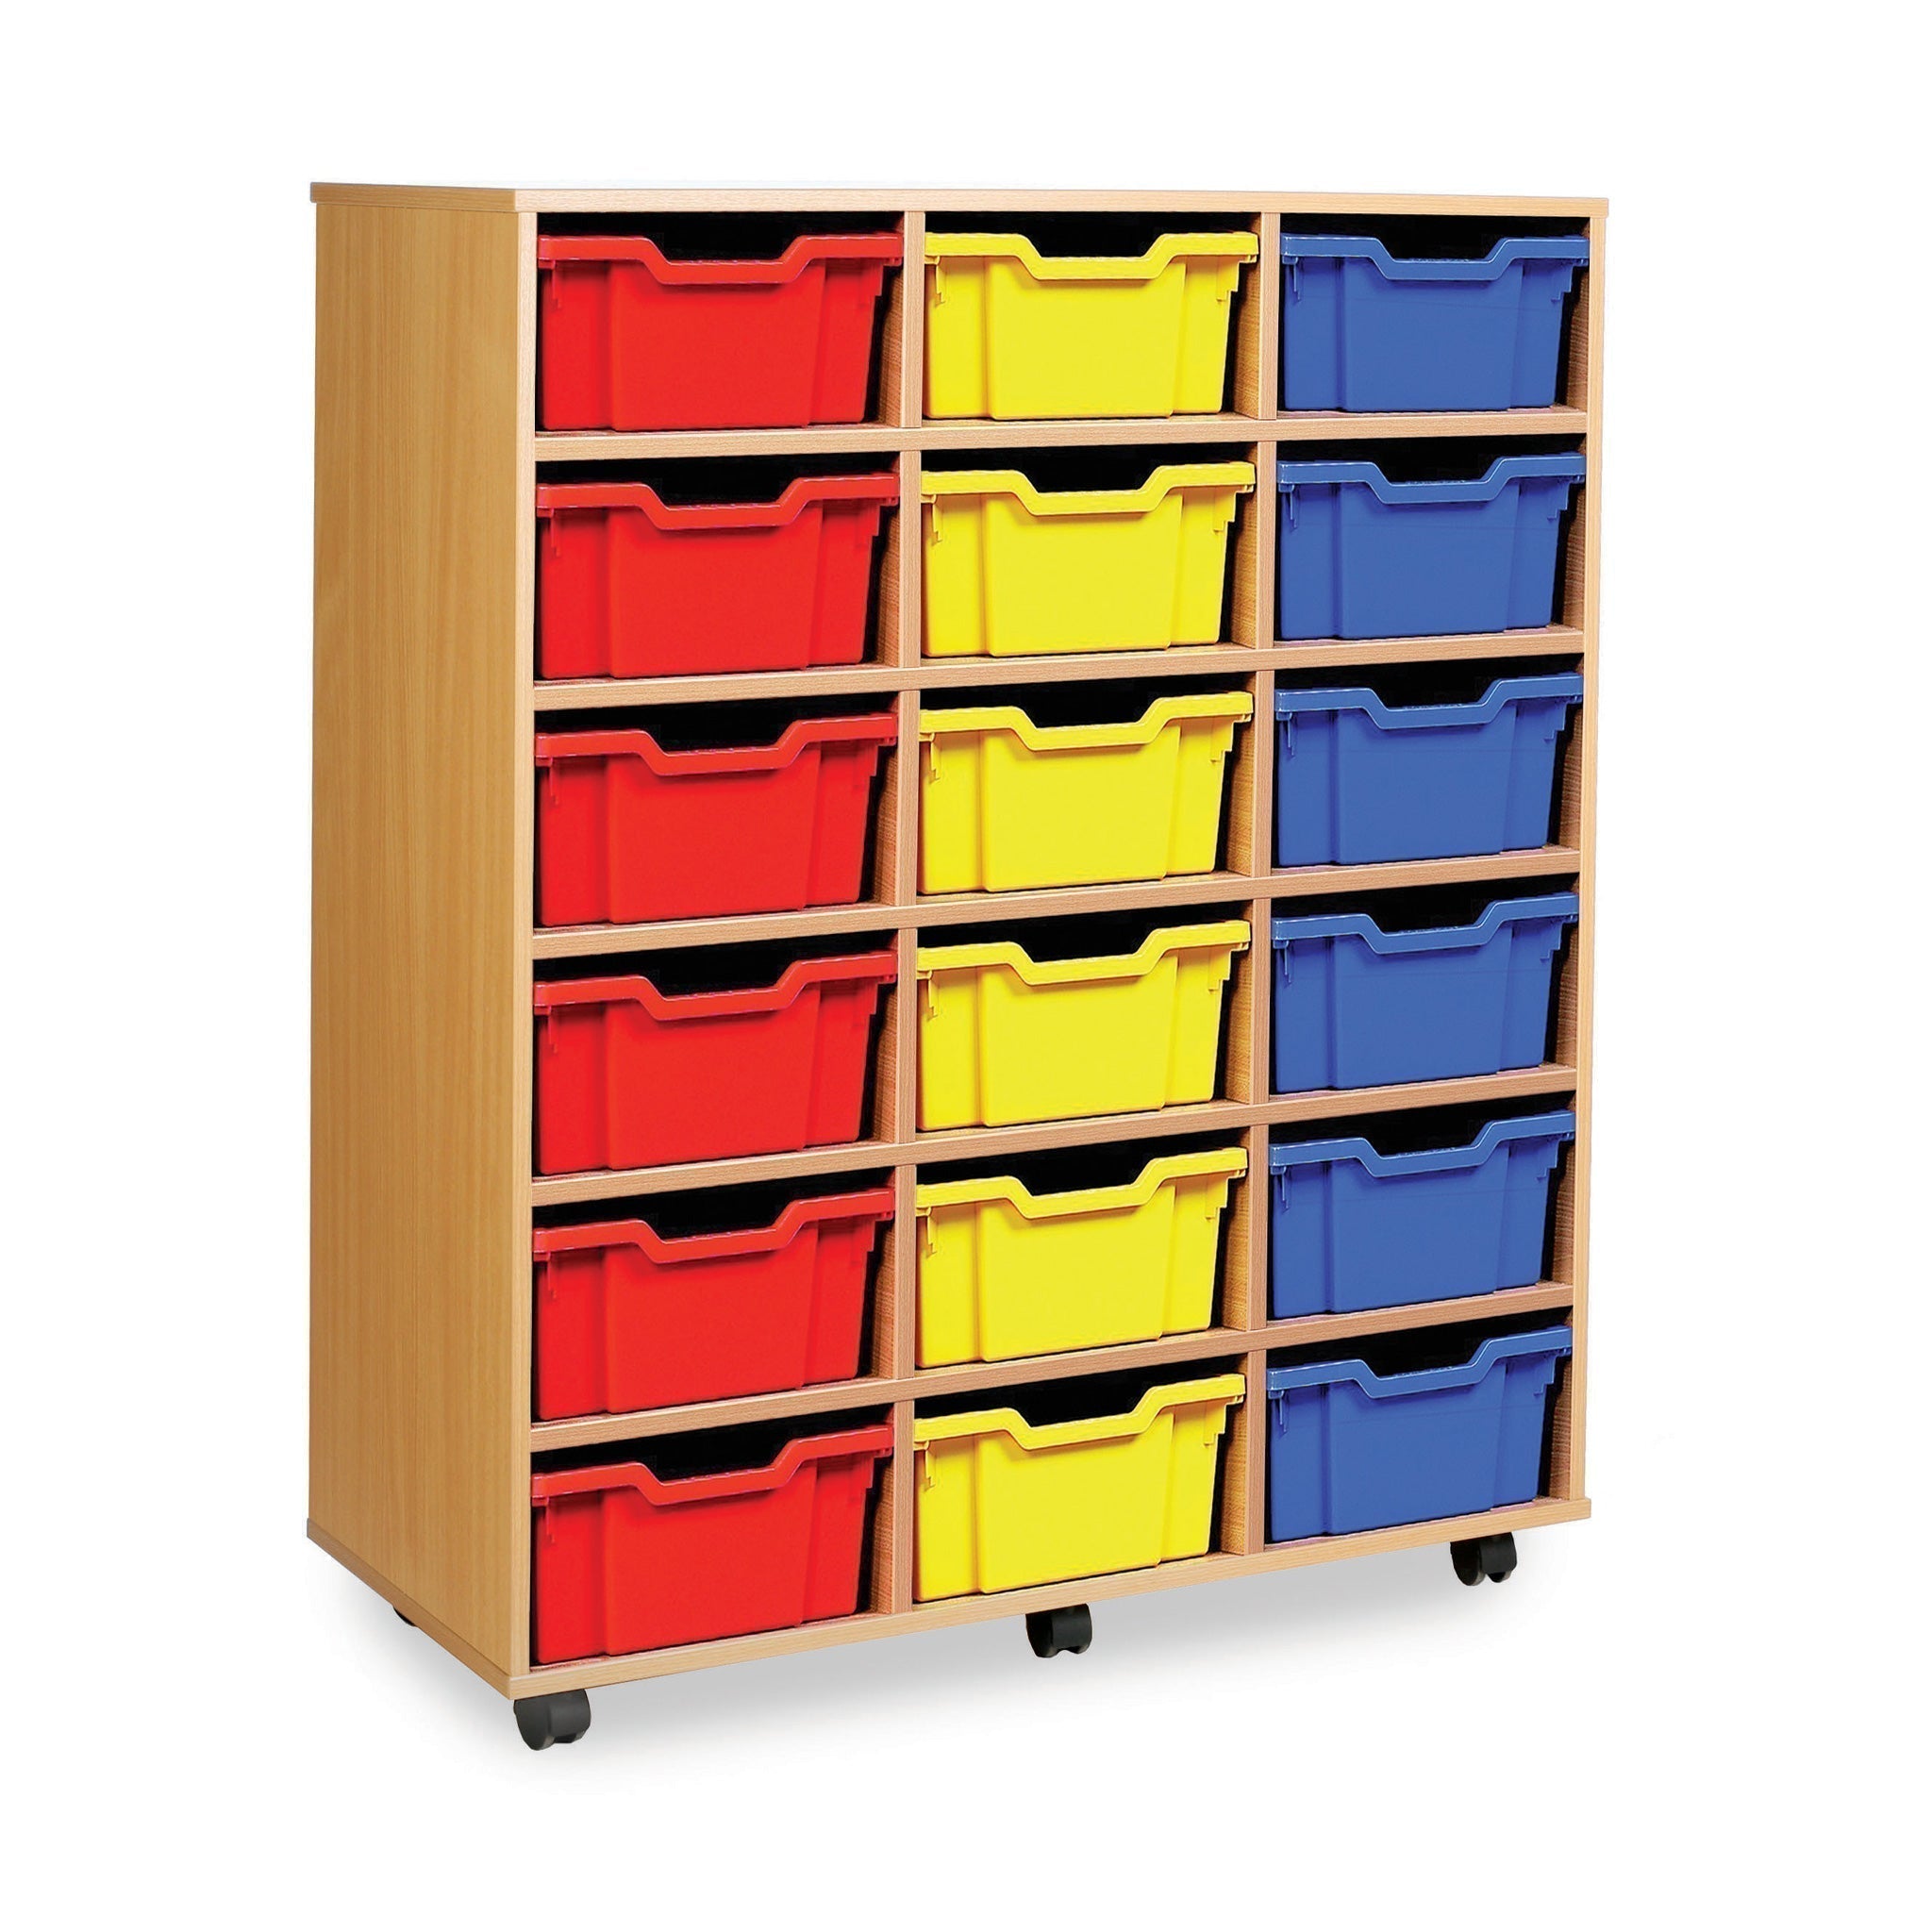 Monarch deep tray storage unit, The Monarch Deep Tray Storage Unit offers a robust and highly functional storage solution, perfect for classroom settings or other spaces requiring organized storage. Built for durability and ease of use, this unit is a sensible choice for environments that need to withstand daily wear and tear. Monarch Deep Tray Storage Unit Features: Versatile Storage Options The unit is available in three different configurations—12, 16, or 18 deep trays—providing ample space to store a va